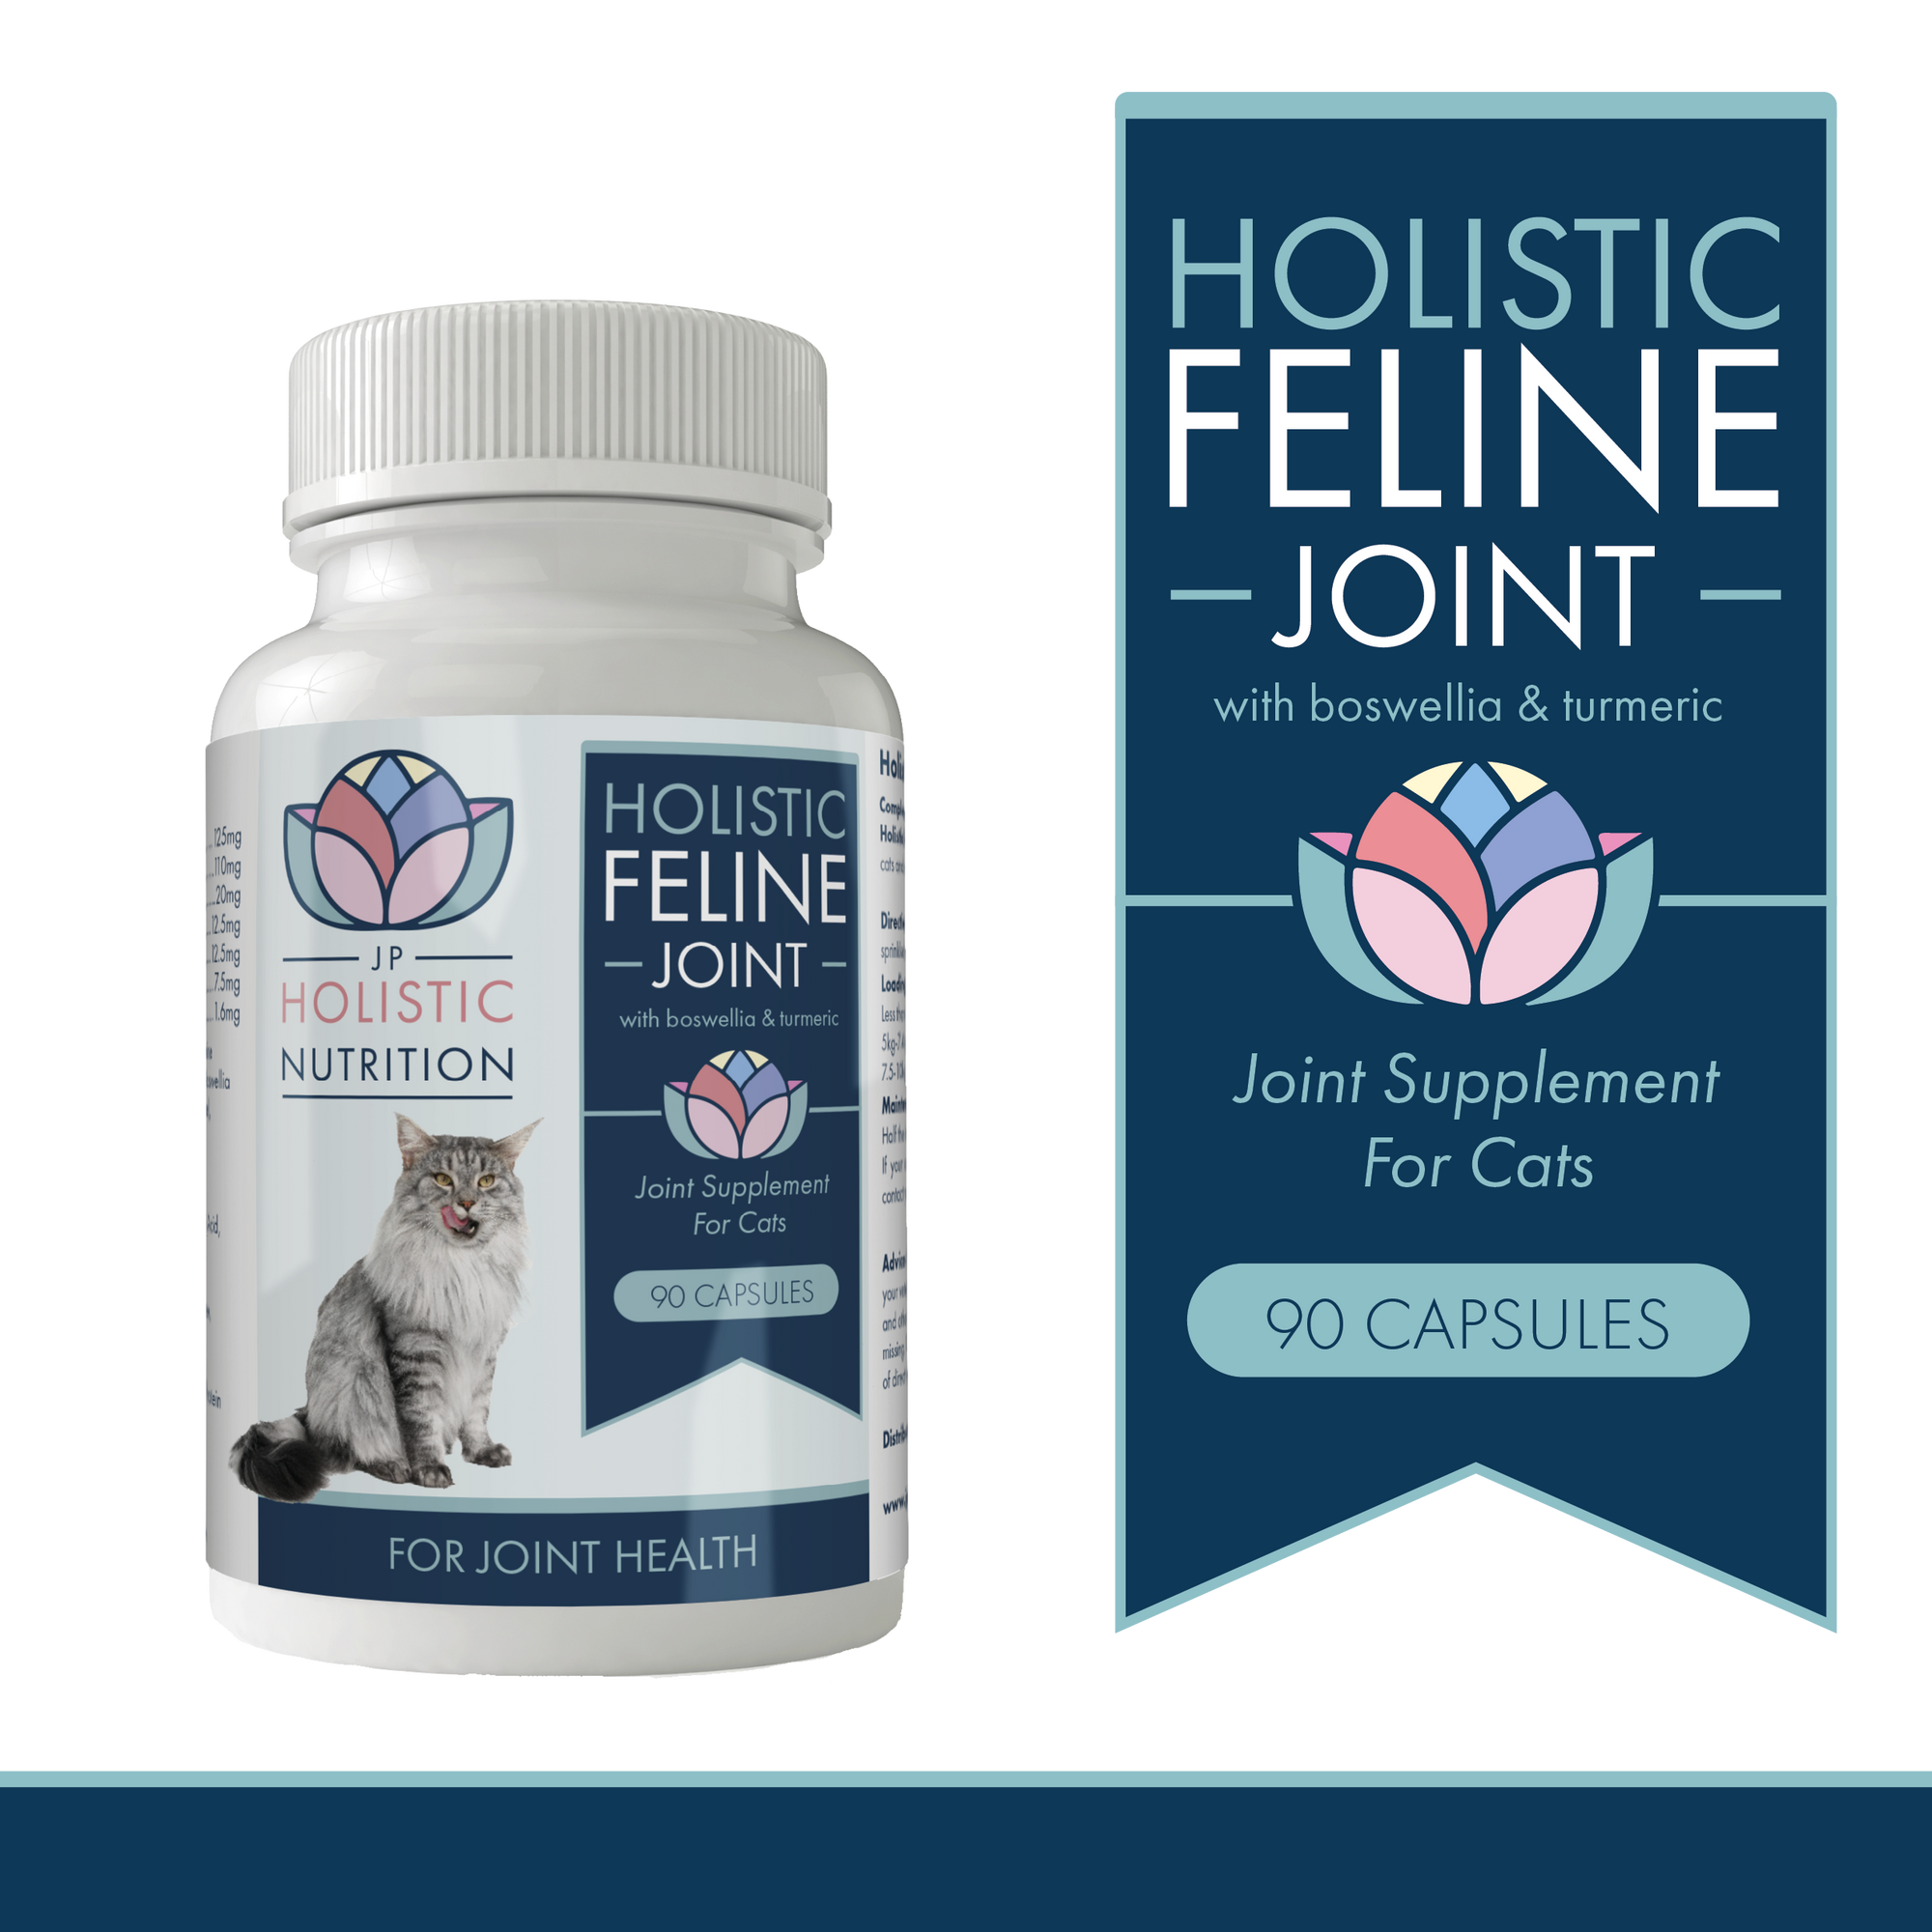 Holistic Feline Joint with Boswellia & Turmeric is a natural joint supplement for cats